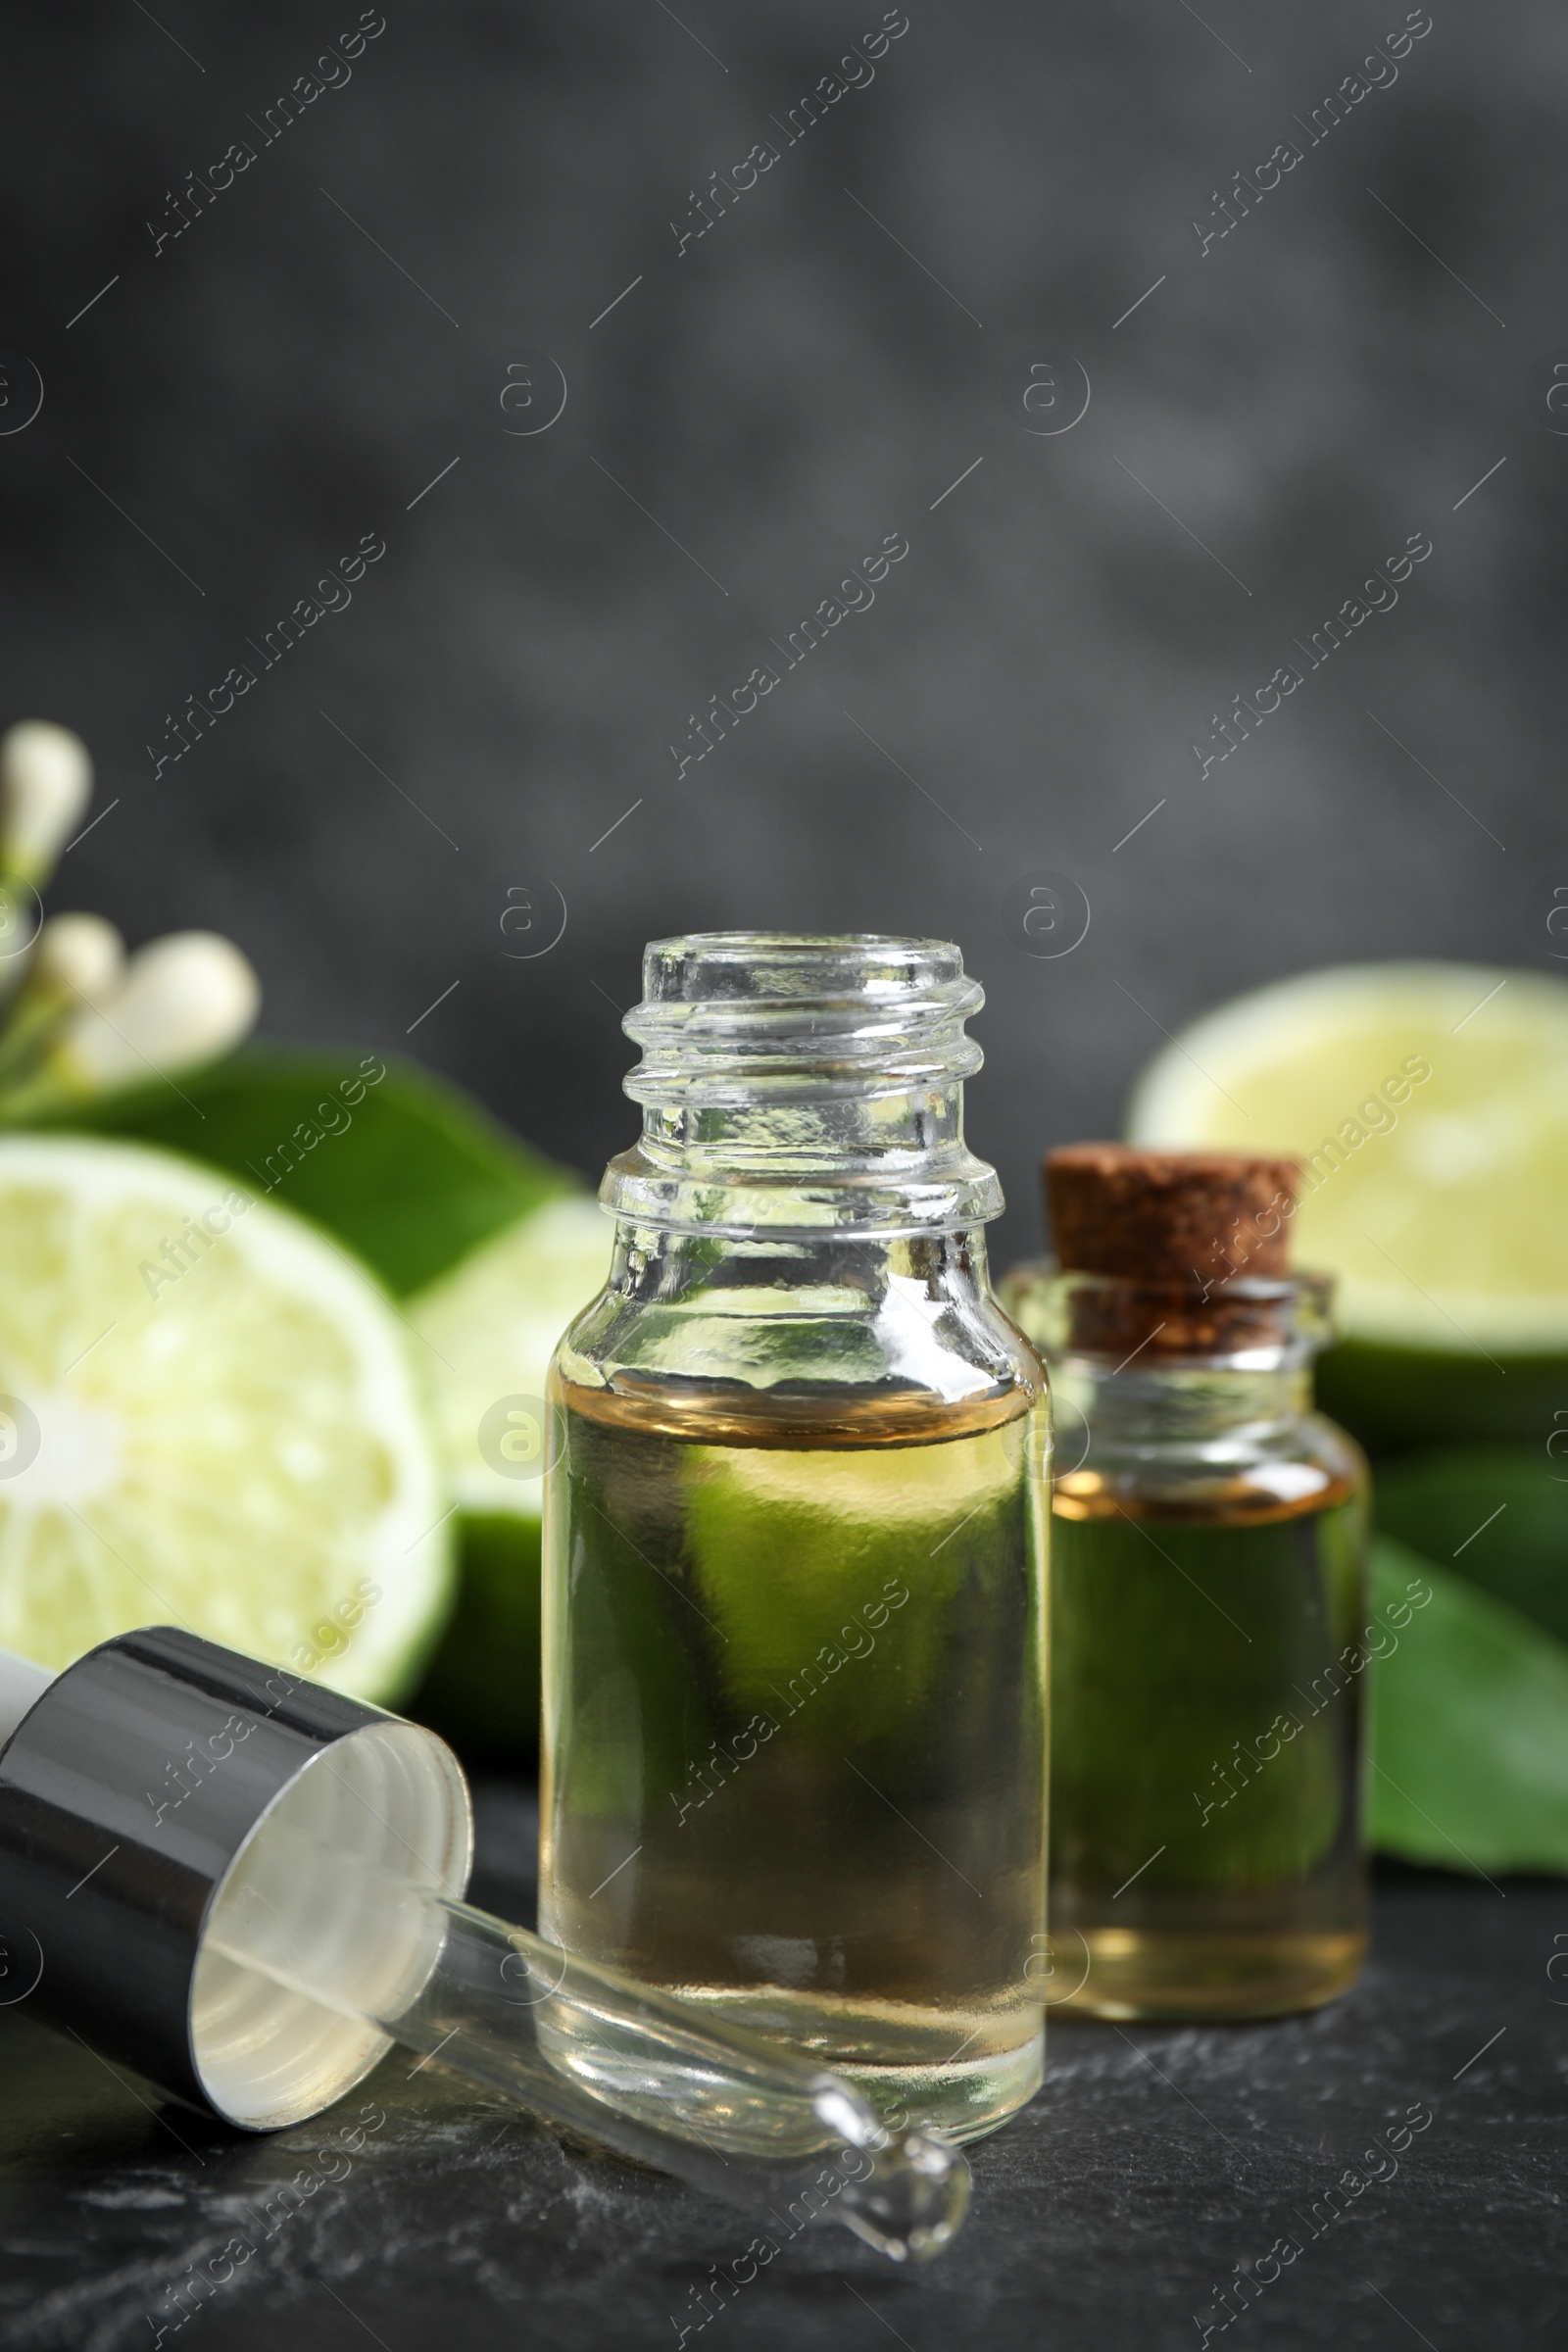 Photo of Bottles of citrus essential oil on black table